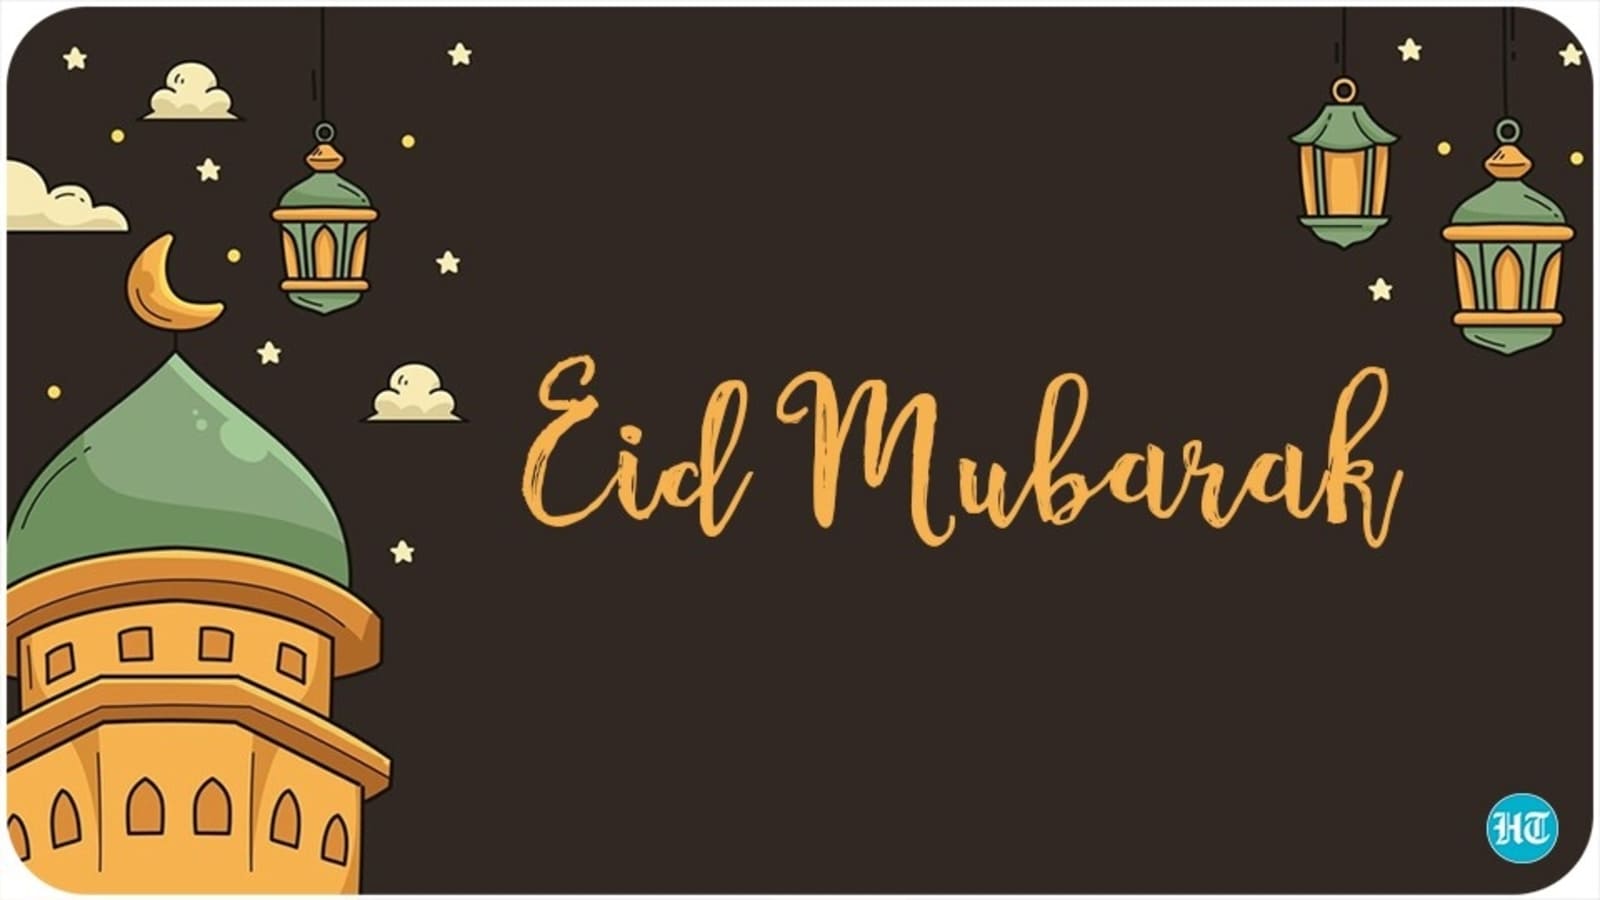 Happy Eid ul Fitr 2021: Wishes, images, quotes to share for Eid Mubarak -  Hindustan Times